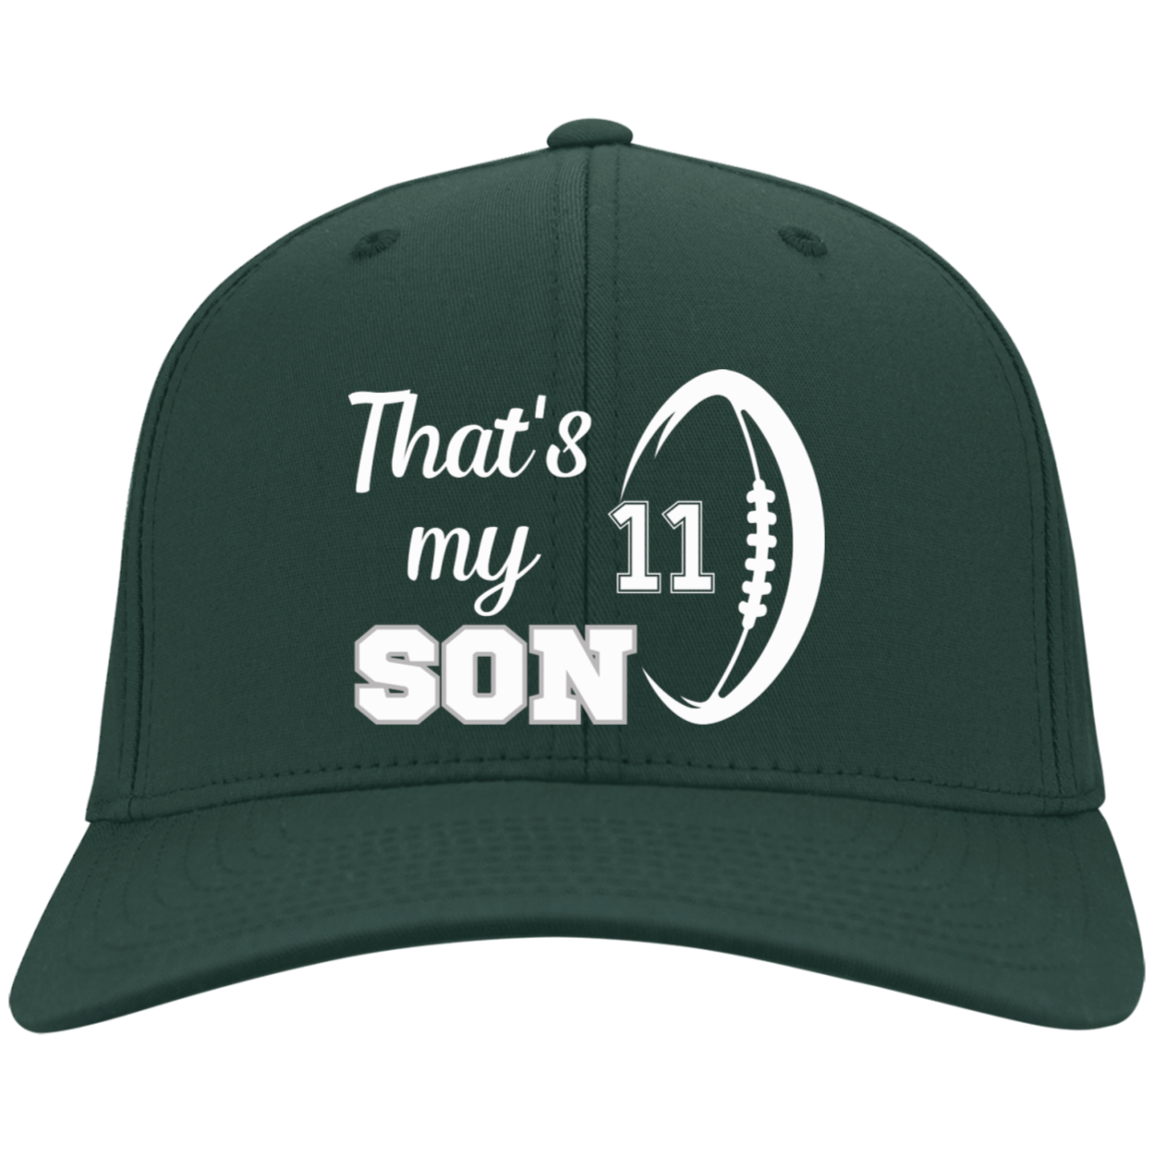 That's my son football hat  Embroidered Twill Cap